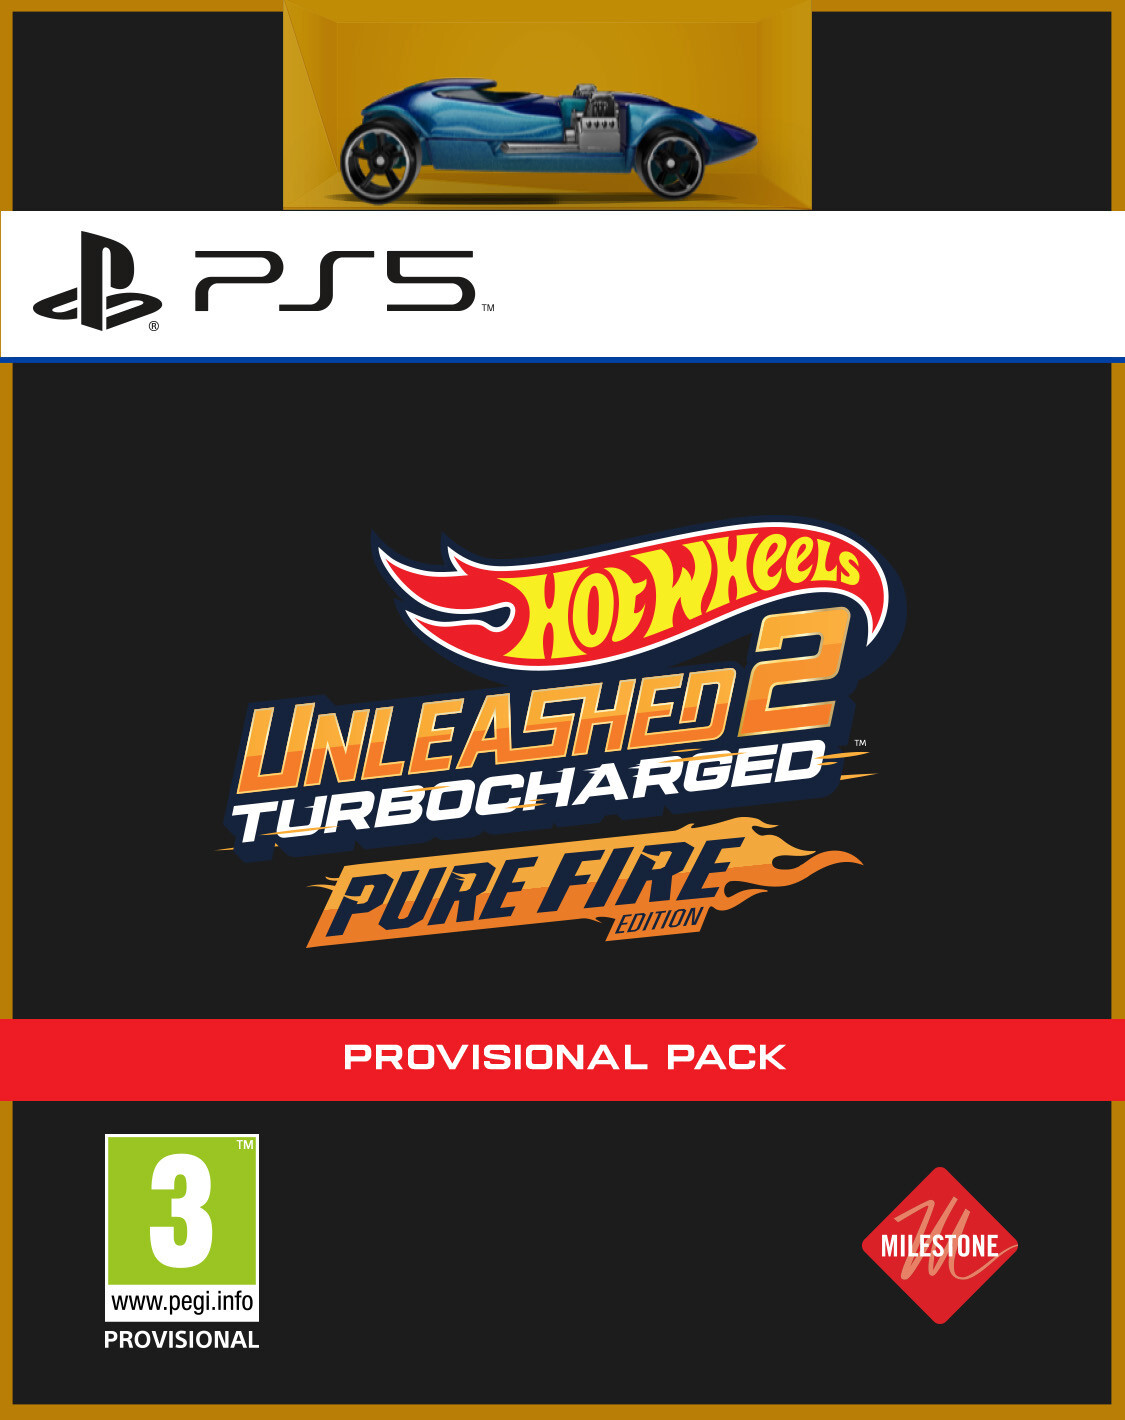 Milestone hot wheels unleashed 2 - turbocharged - pure fire edition PlayStation 5